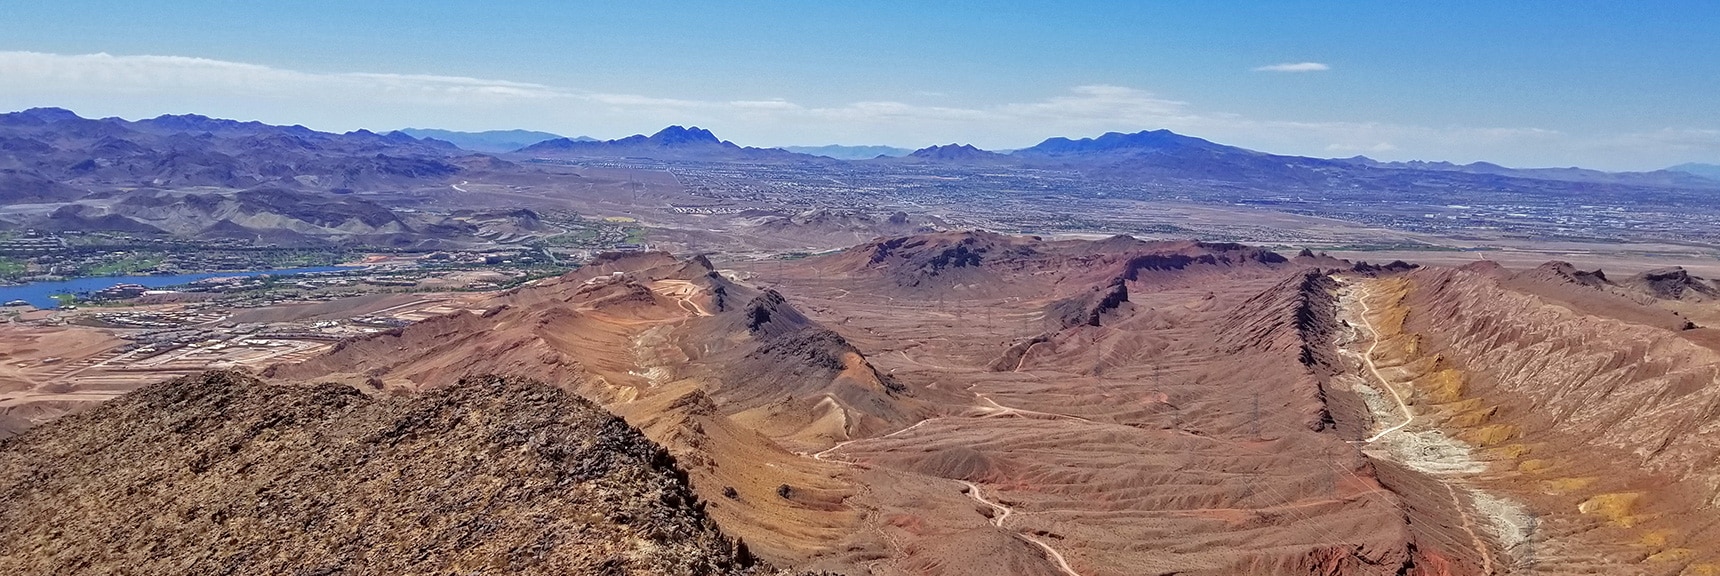 Southern View from the Summit. Full Circle Back to Lake Las Vegas | Lava Butte | Lake Mead National Recreation Area, Nevada